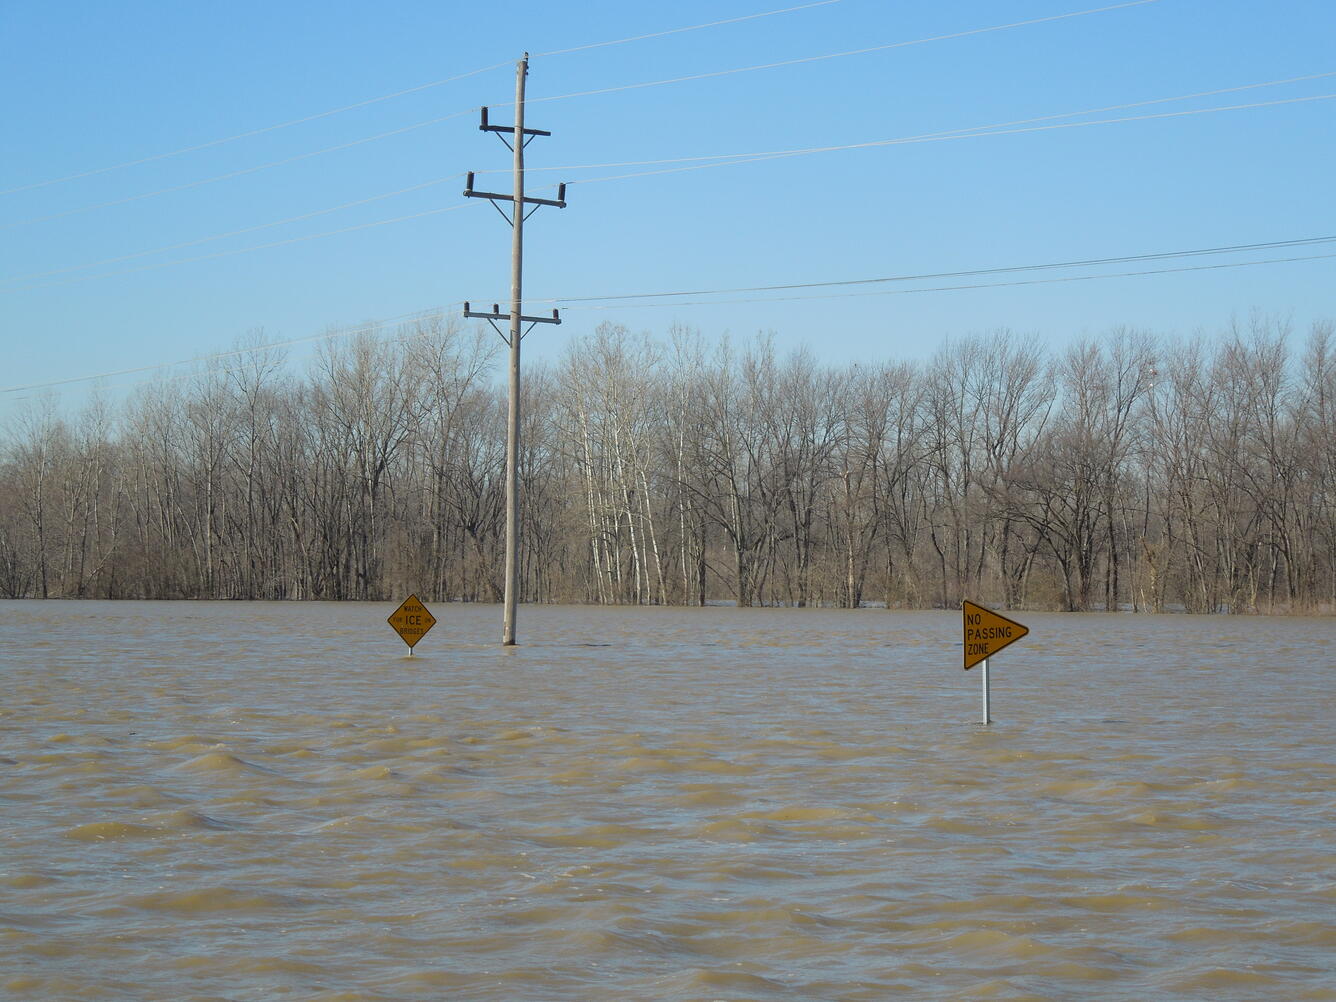 WHITE RIVER NEAR EDWARDSPORT, IN during a flood